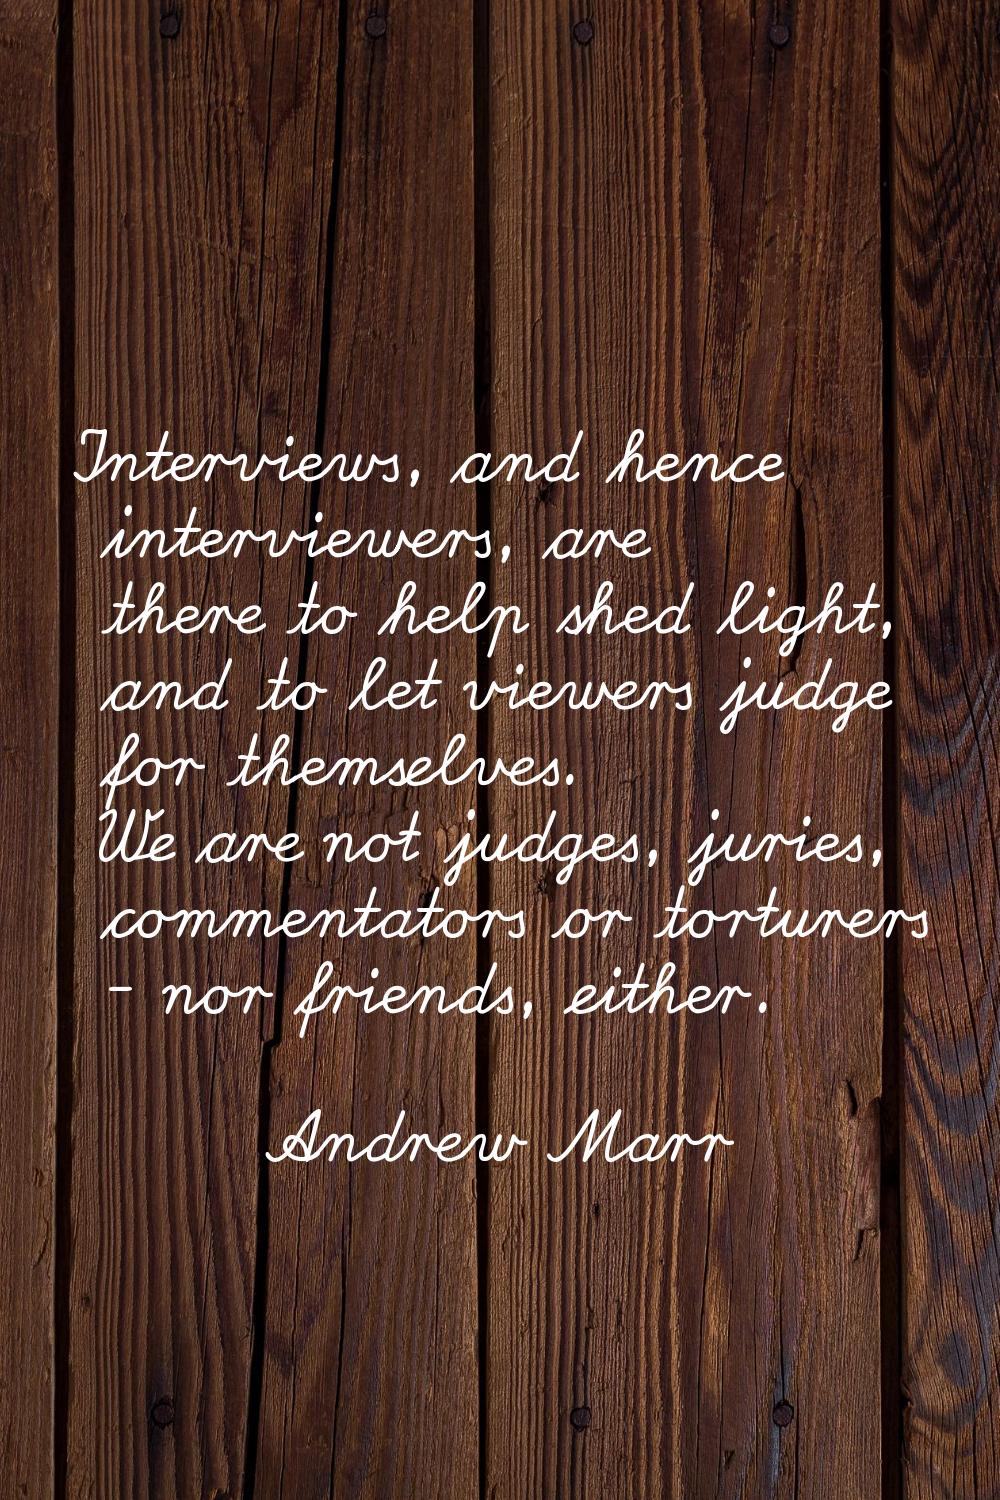 Interviews, and hence interviewers, are there to help shed light, and to let viewers judge for them